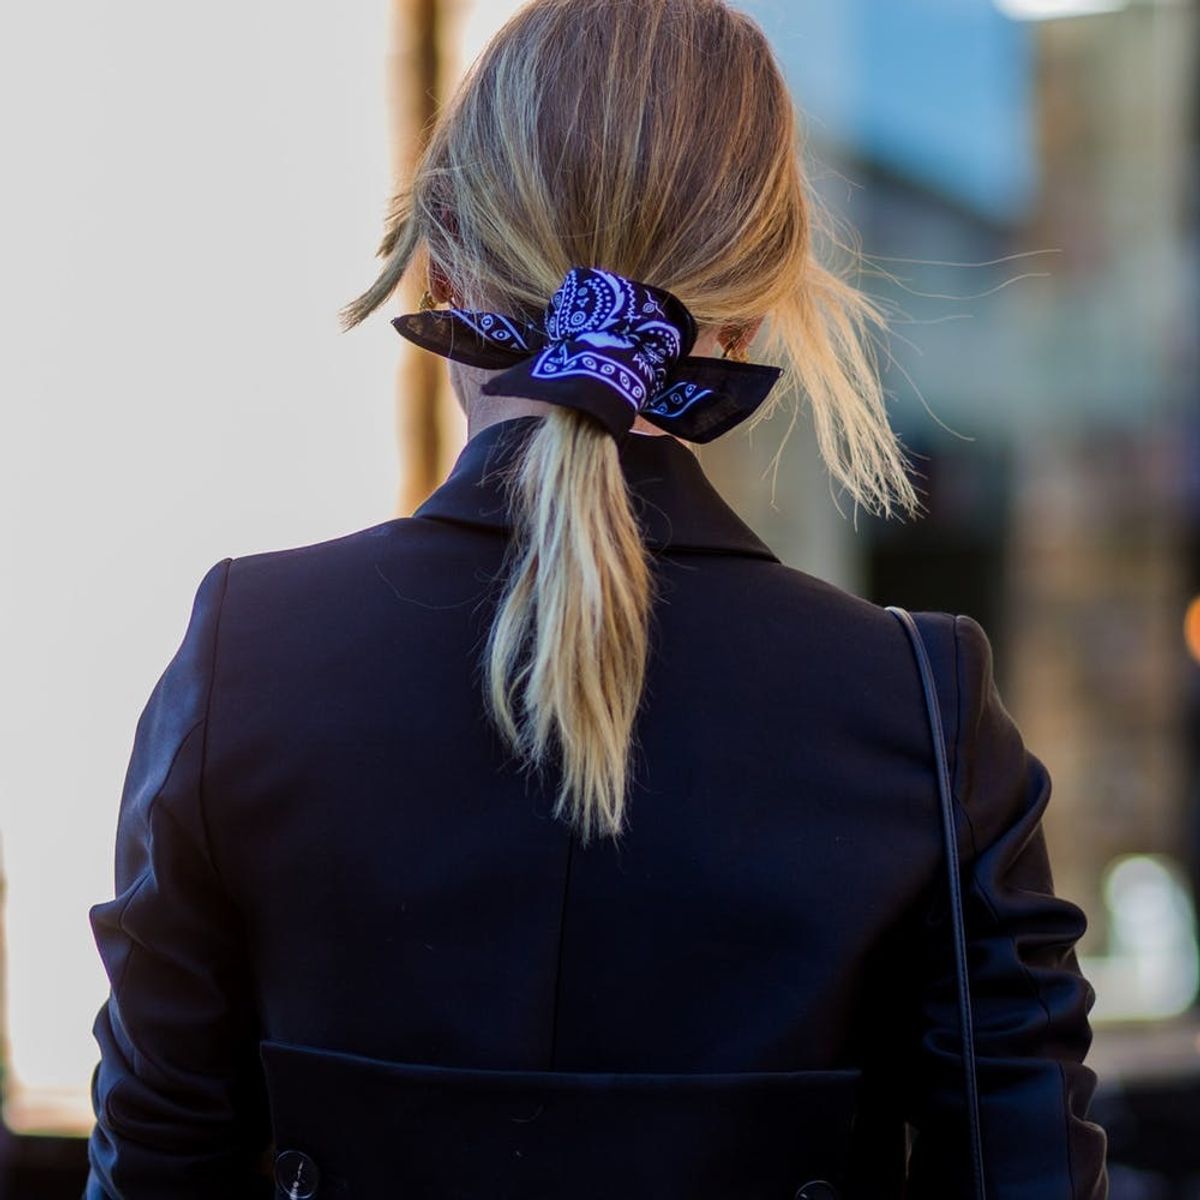 5 Cool Ways to Upgrade Your Ponytail, According to Pinterest